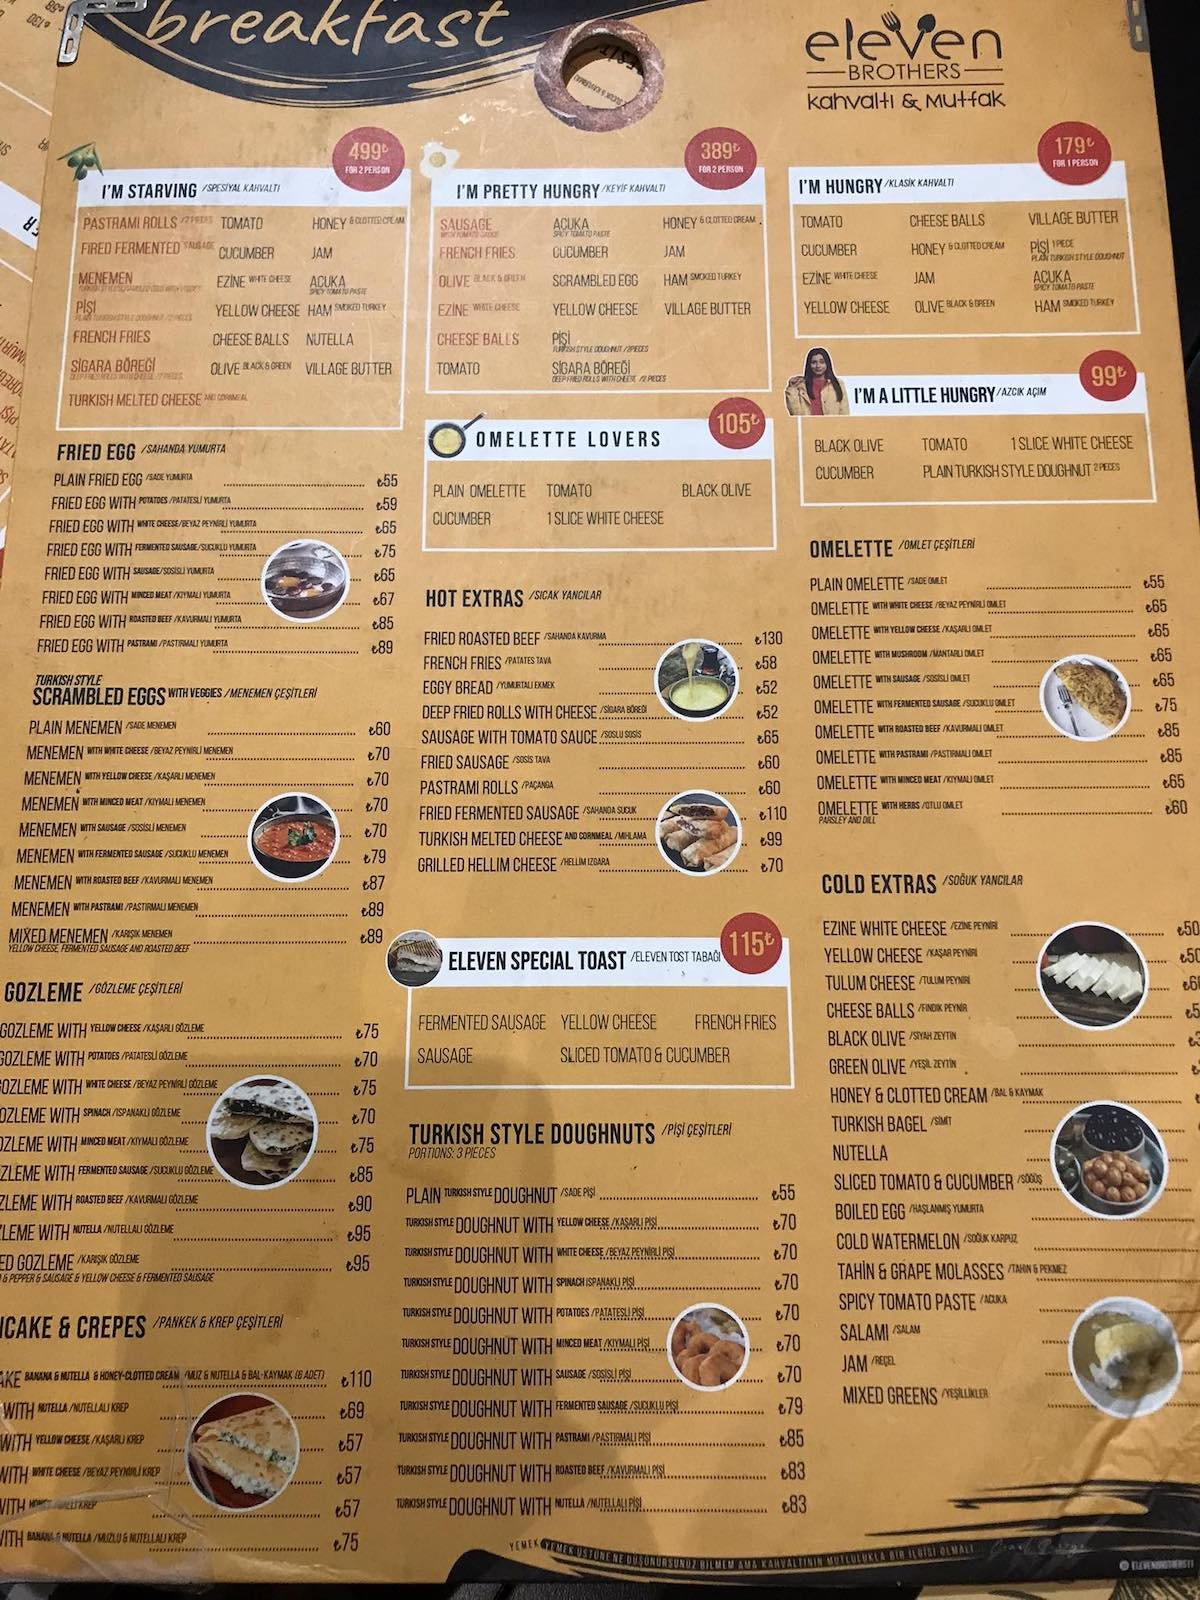 11 Brothers menu with a variety of food on it.